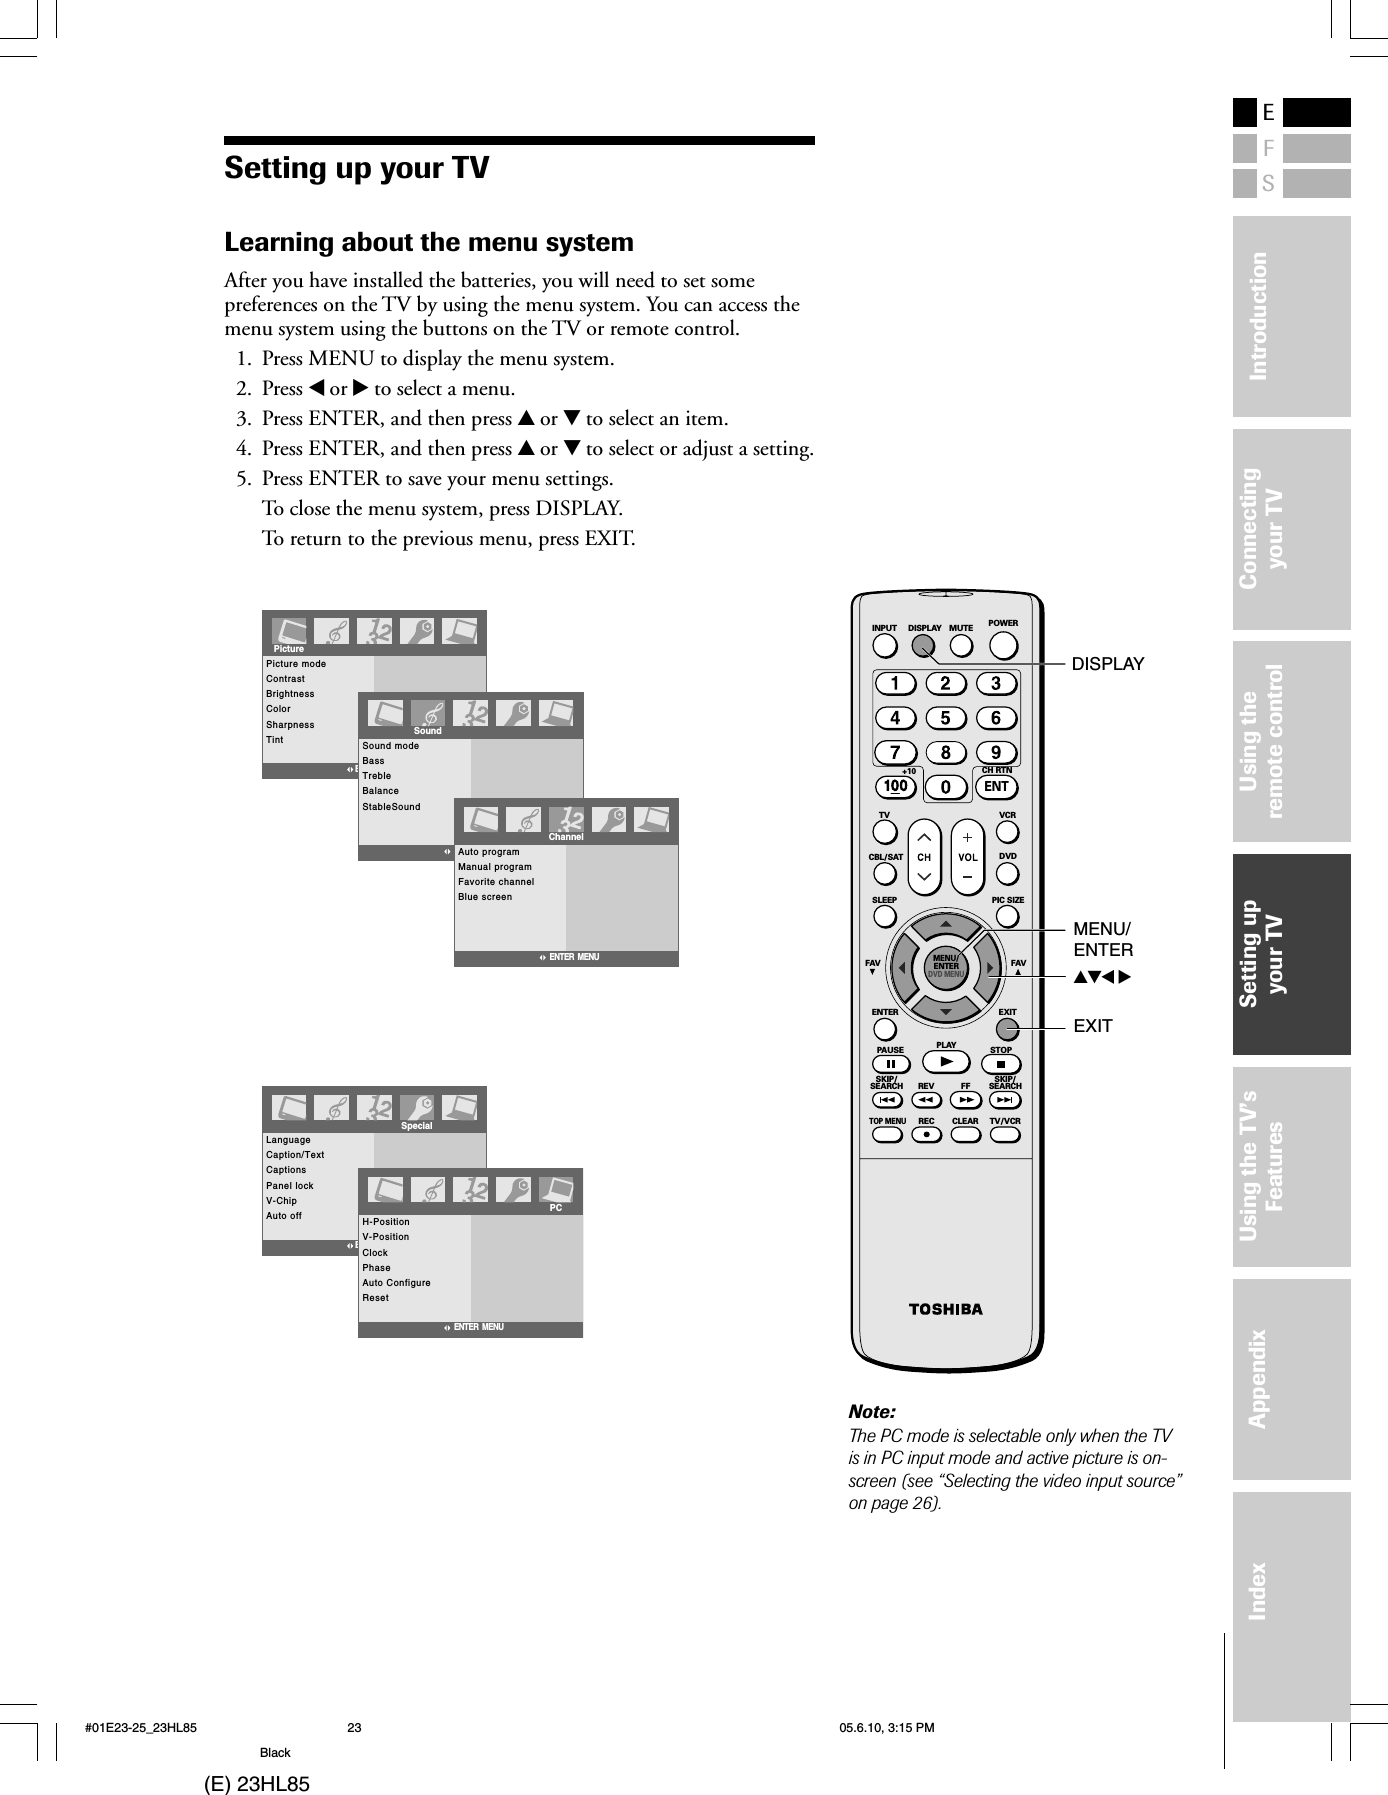 (E) 23HL85ESFUsing theremote controlUsing the TV’sFeaturesAppendixIndex IntroductionConnectingyour TVSetting upyour TVSetting up your TVLearning about the menu systemAfter you have installed the batteries, you will need to set somepreferences on the TV by using the menu system. You can access themenu system using the buttons on the TV or remote control.1. Press MENU to display the menu system.2. Press x or • to select a menu.3. Press ENTER, and then press y or z to select an item.4. Press ENTER, and then press y or z to select or adjust a setting.5. Press ENTER to save your menu settings.To close the menu system, press DISPLAY.To return to the previous menu, press EXIT.Picture modeContrastBrightnessColorSharpnessTintPictureENTER  MENUSound modeBassTrebleBalanceStableSoundENTER  MENUSoundAuto programManual programFavorite channelBlue screenChannelENTER  MENULanguageCaption/TextCaptionsPanel lockV-ChipAuto offSpecialENTER  MENUH-PositionV-PositionClockPhaseAuto ConfigureResetENTER  MENUPCSKIP/SEARCH SKIP/SEARCHCLEARREC TV/VCRTOP MENUREV FFPAUSE PLAY STOPENTER EXITFAV FAVSLEEP PIC SIZEMENU/ENTERDVD MENUCBL/SAT DVDTV VCR+10 CH RTNINPUT DISPLAY MUTE POWERENTyzx •MENU/ENTEREXITNote:The PC mode is selectable only when the TVis in PC input mode and active picture is on-screen (see “Selecting the video input source”on page 26).DISPLAY#01E23-25_23HL85 05.6.10, 3:15 PM23Black